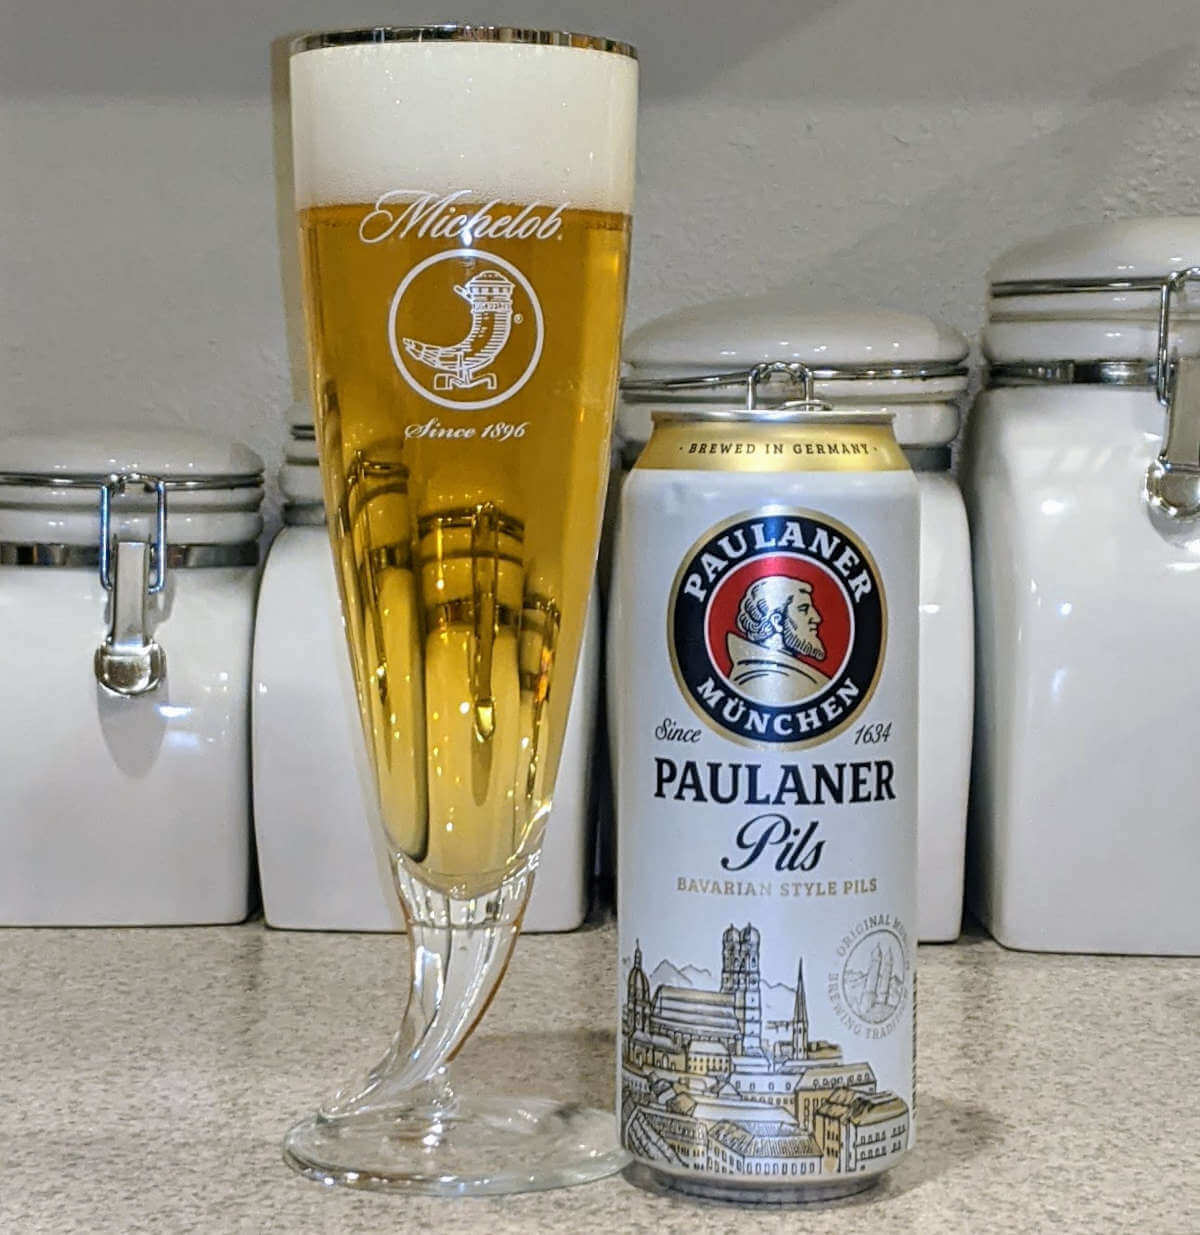 Seek out Paulaner Pils for an authentic German pilsner experience (review)